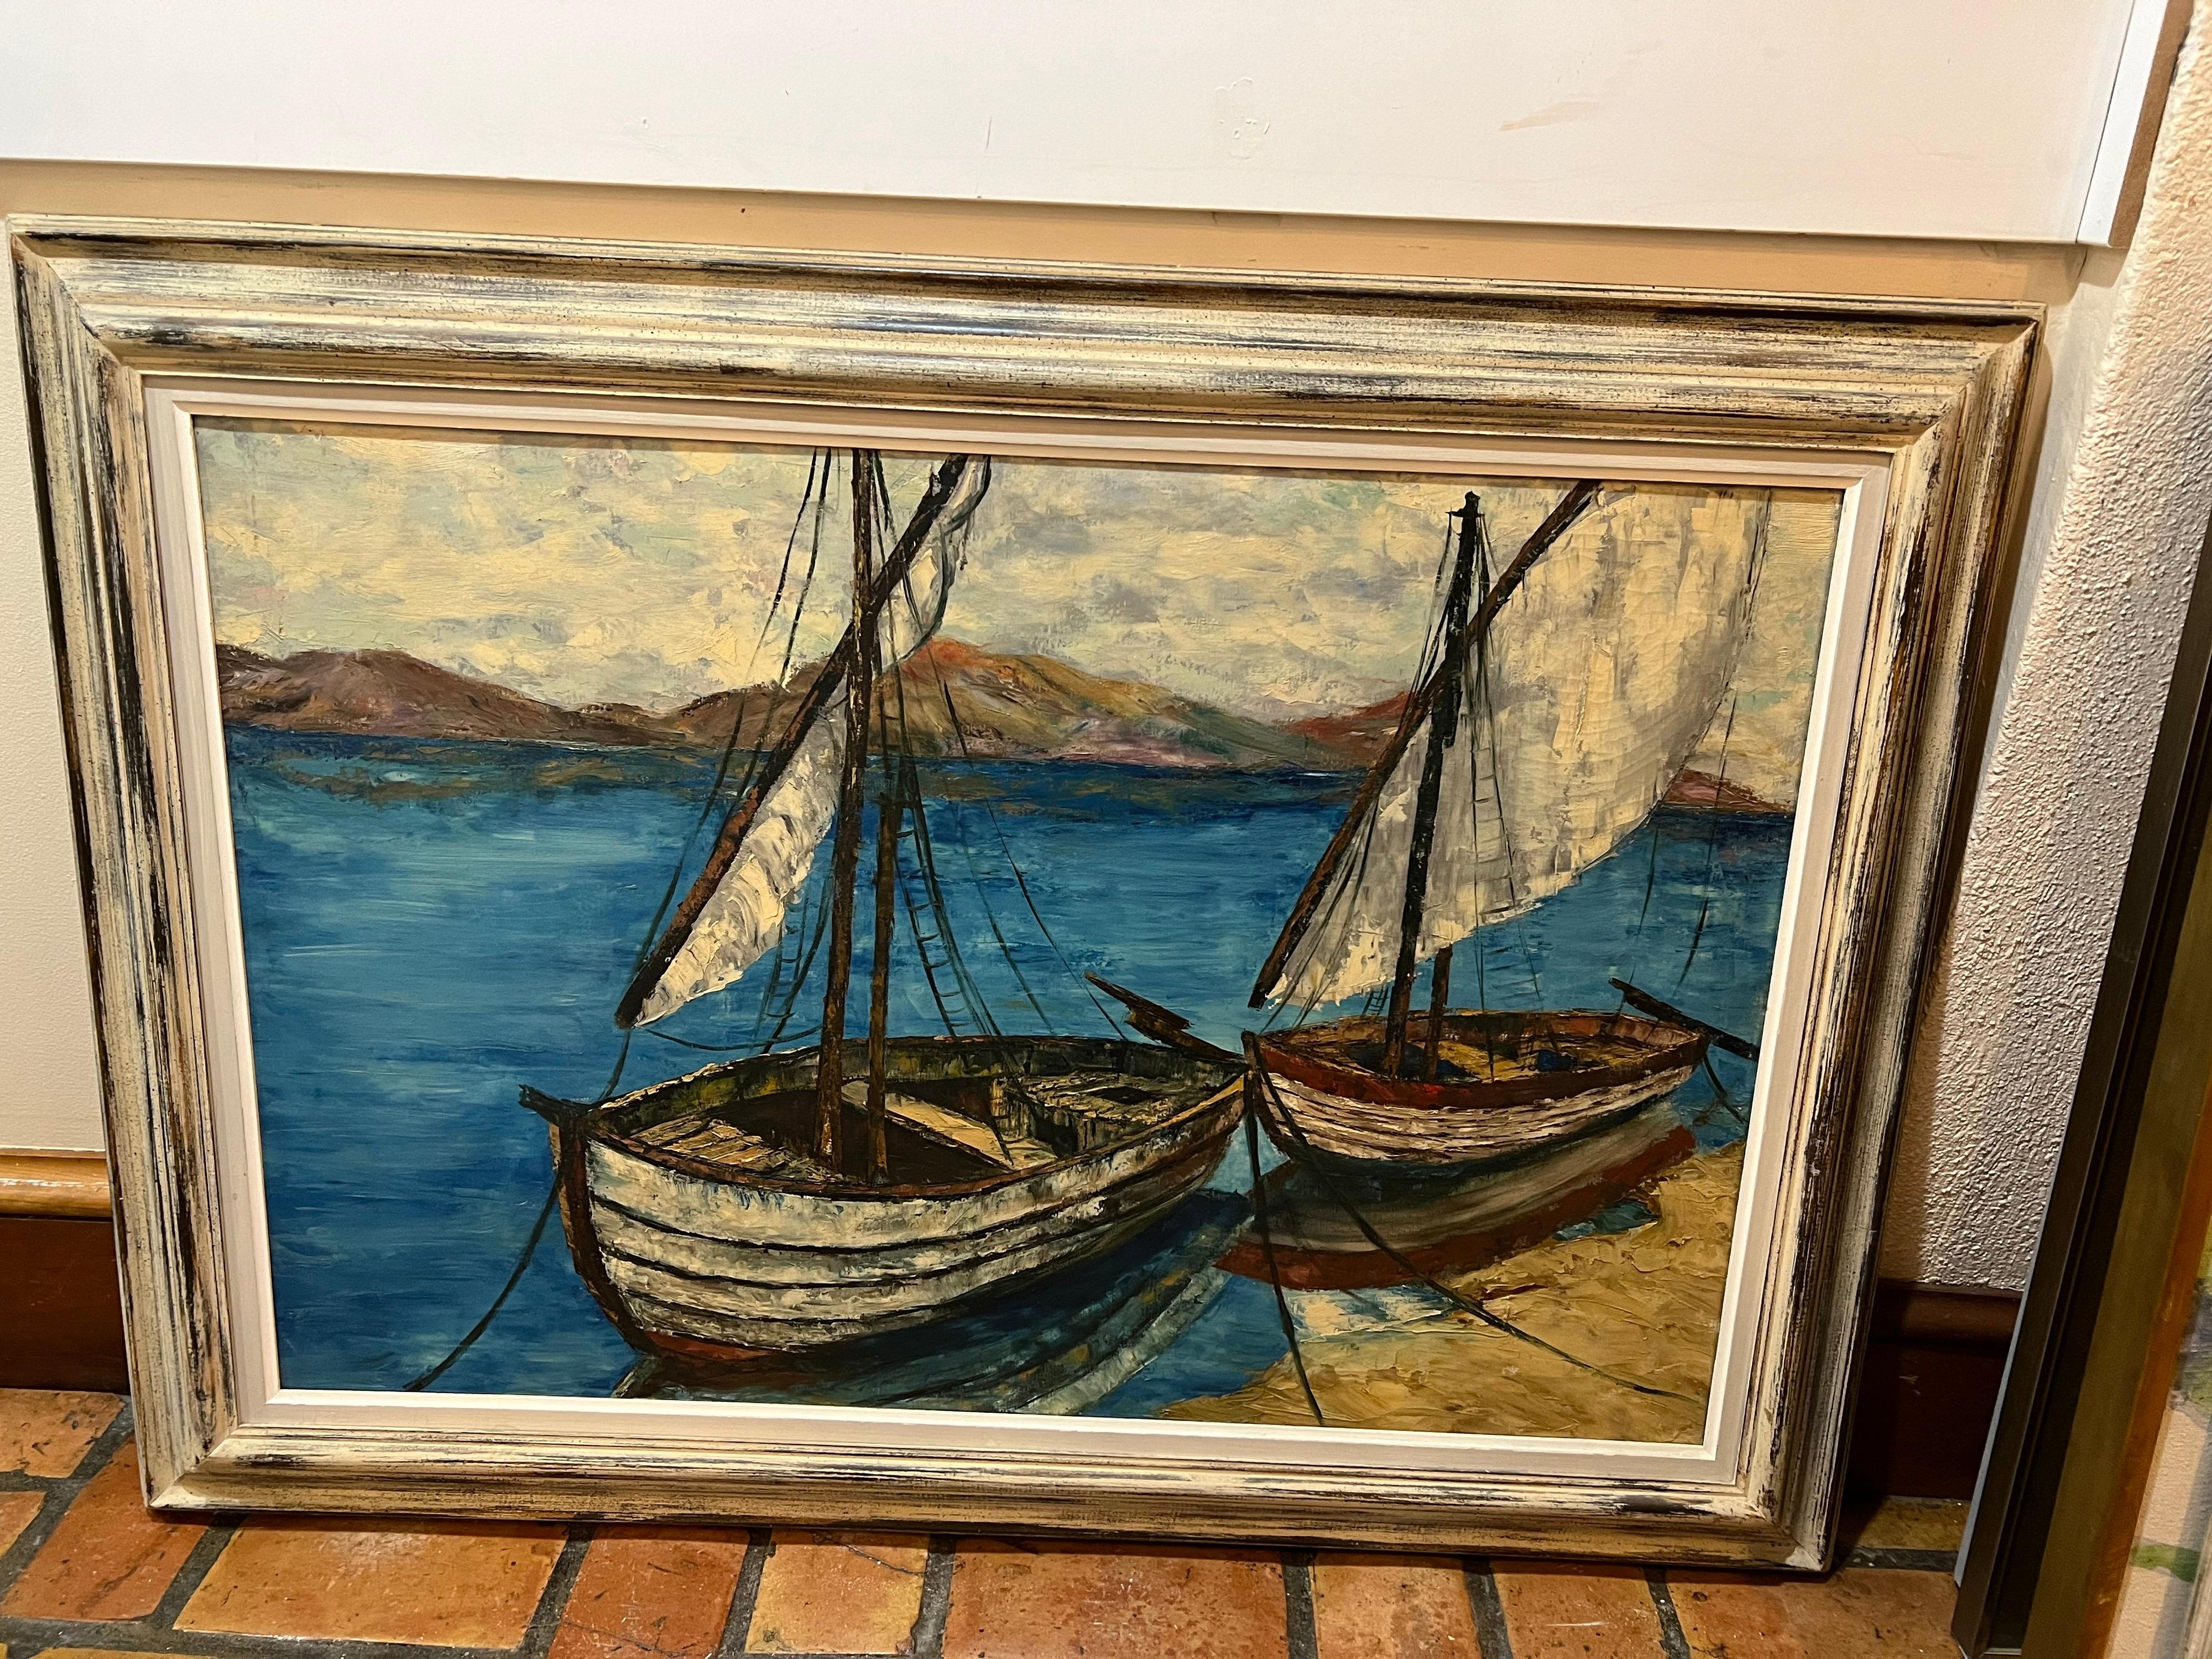 Large mid century oil on canvas of Sailboats. Tranquil setting of two sailboats drifting in a large blue body of water with mountains in the background. Nice impasto technique. Original wooden driftwood color frame with linen border. This item can